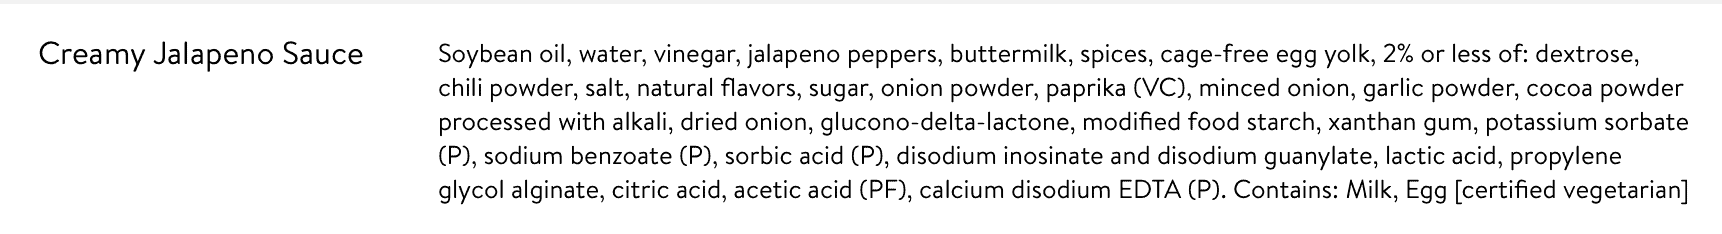 ingredients for creamy jalapeno sauce